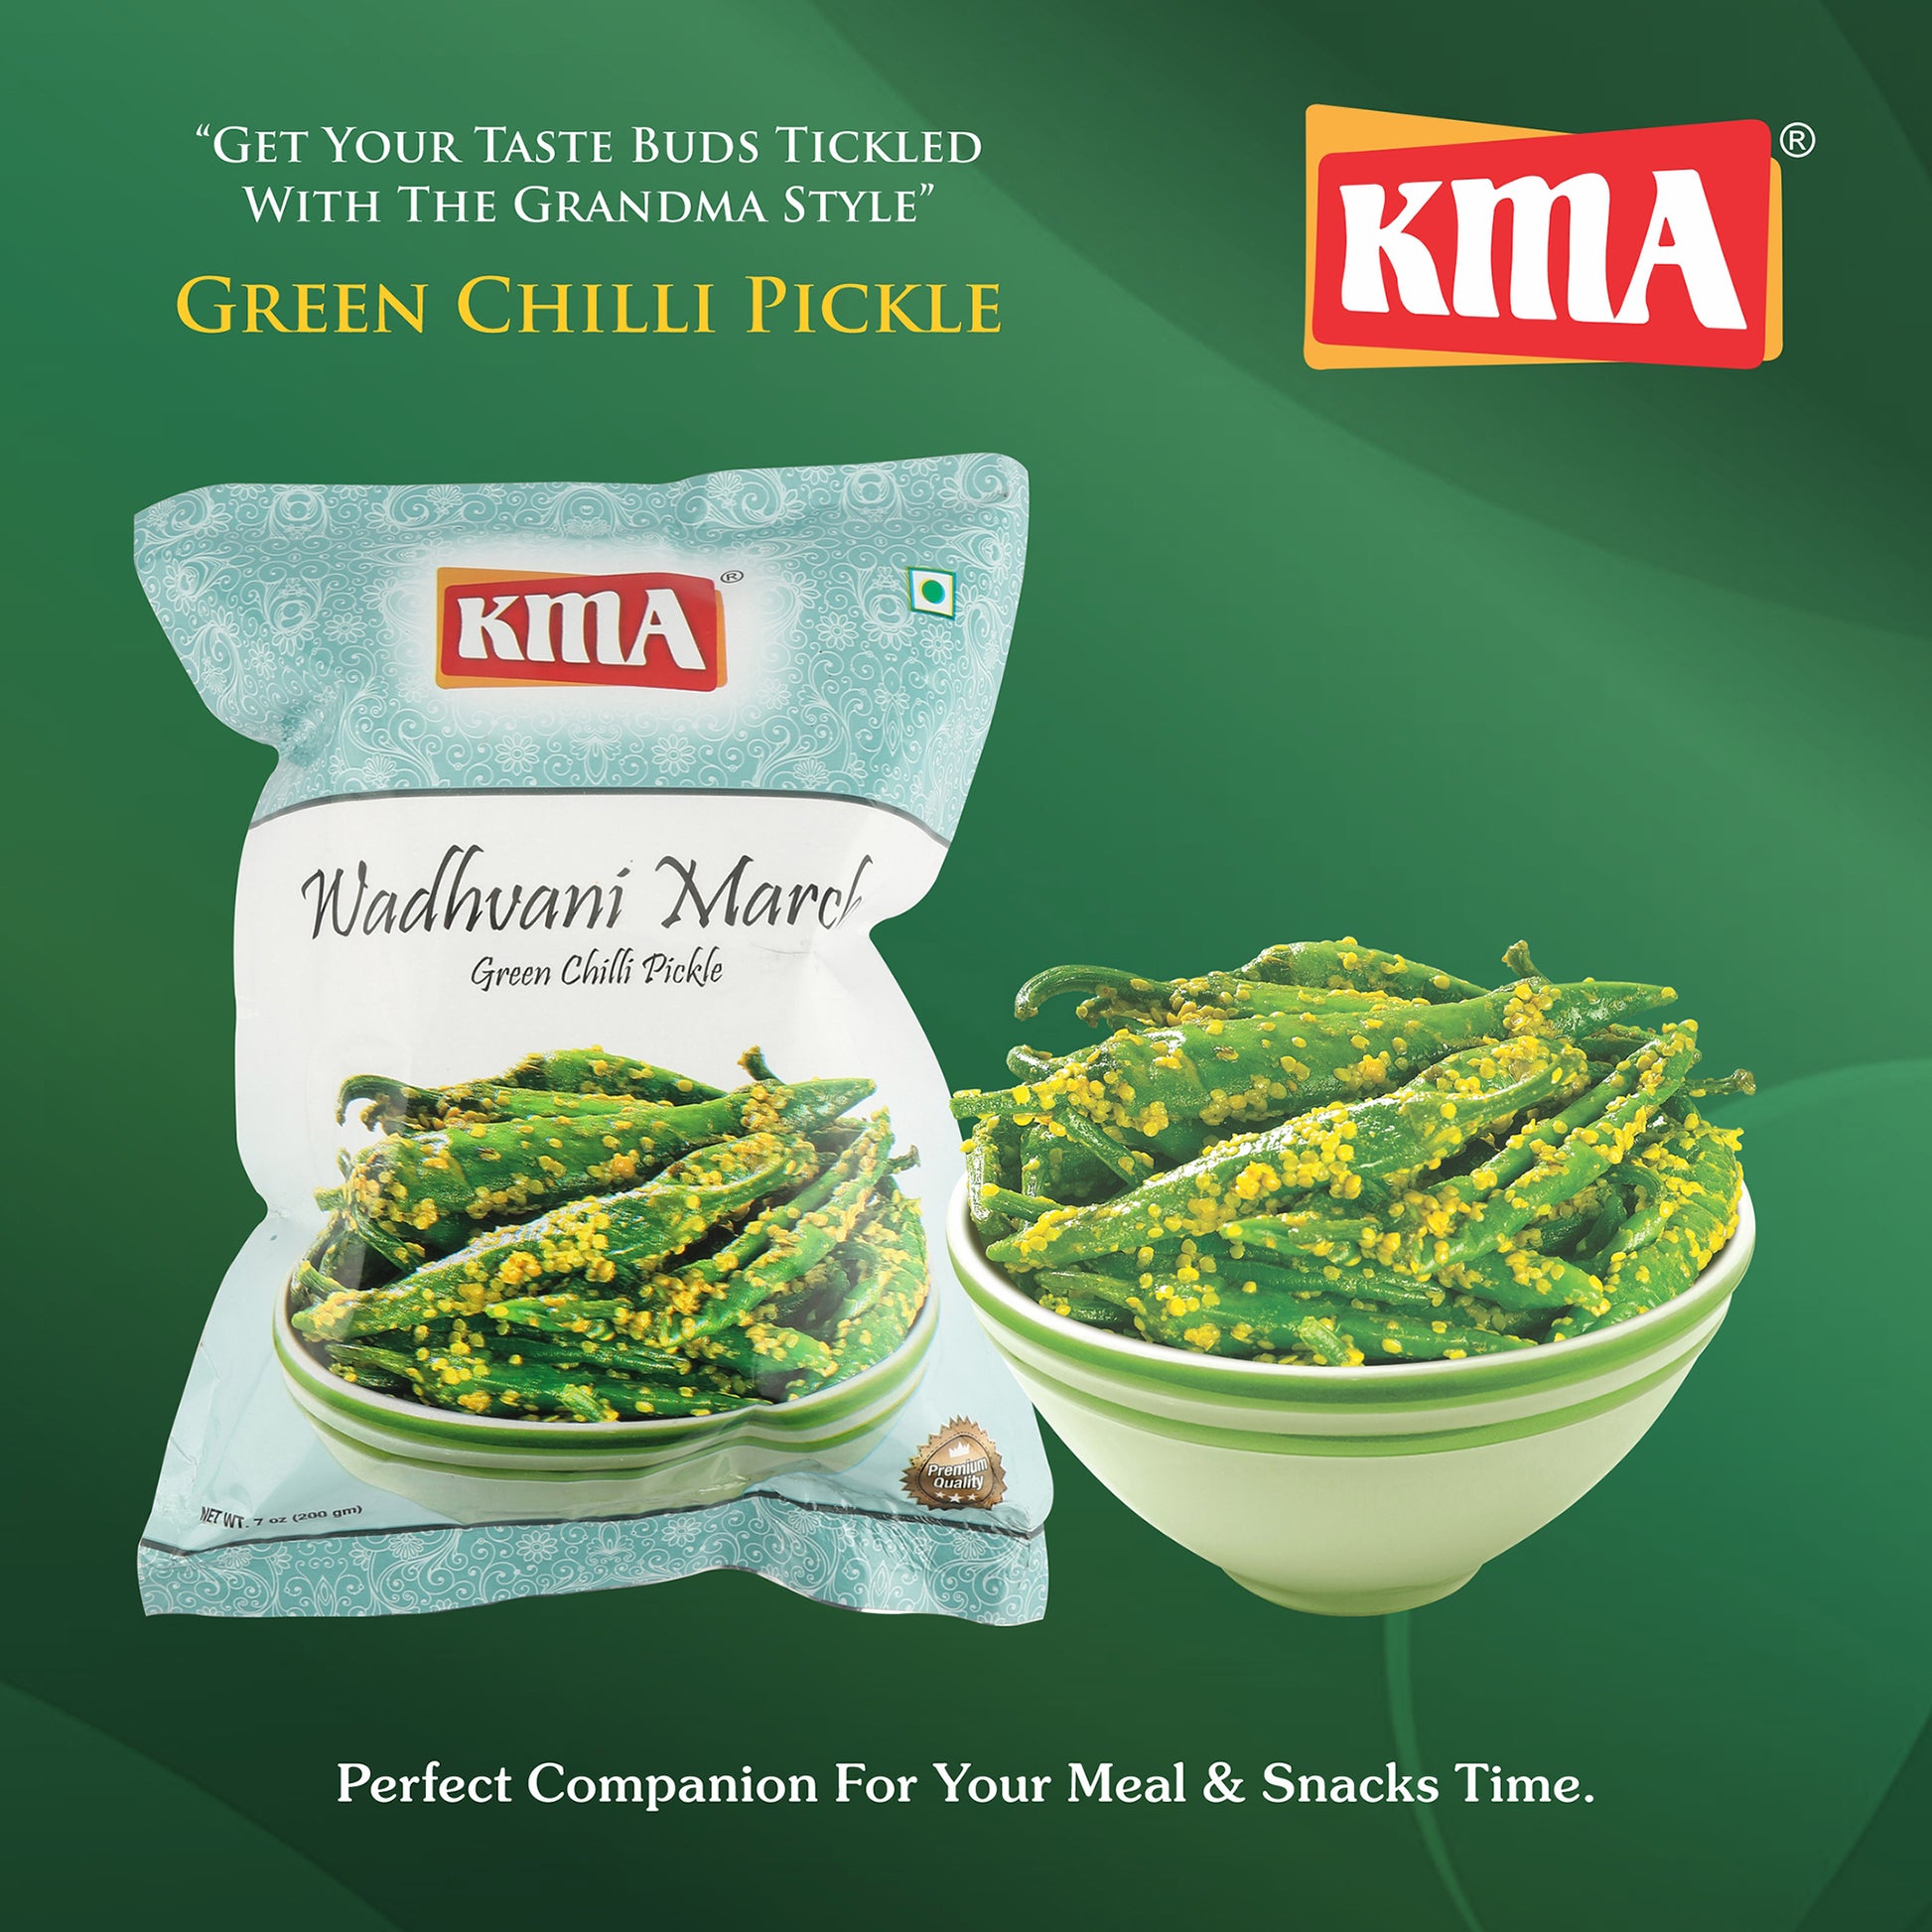 Whether you want to spice up your sandwiches, parathas, or simply enjoy it as a side dish, this pickle is the perfect accompaniment. With a shelf life of 4 months, you can savor the flavors of this pickle for a long time. It is manufactured in an FSSAI, FSSC 22000 Accredited, and US FDA Approved facility, guaranteeing the highest standards of quality and safety.